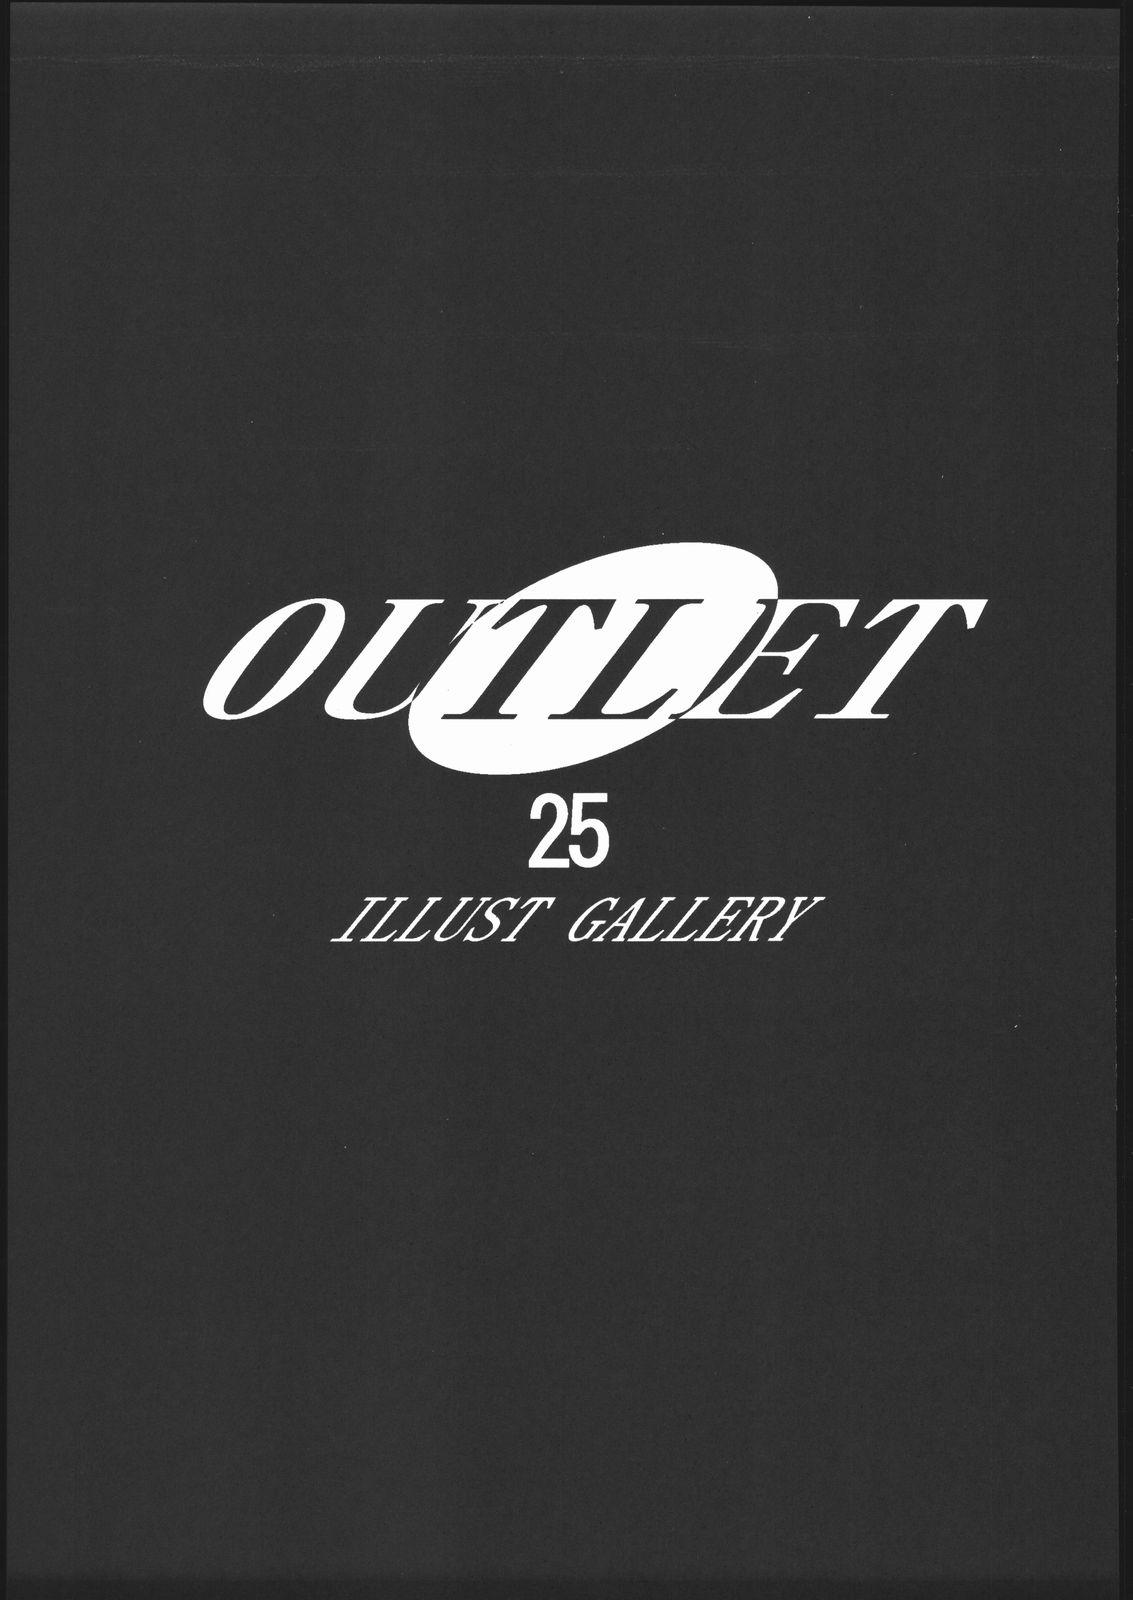 OUTLET 25 37